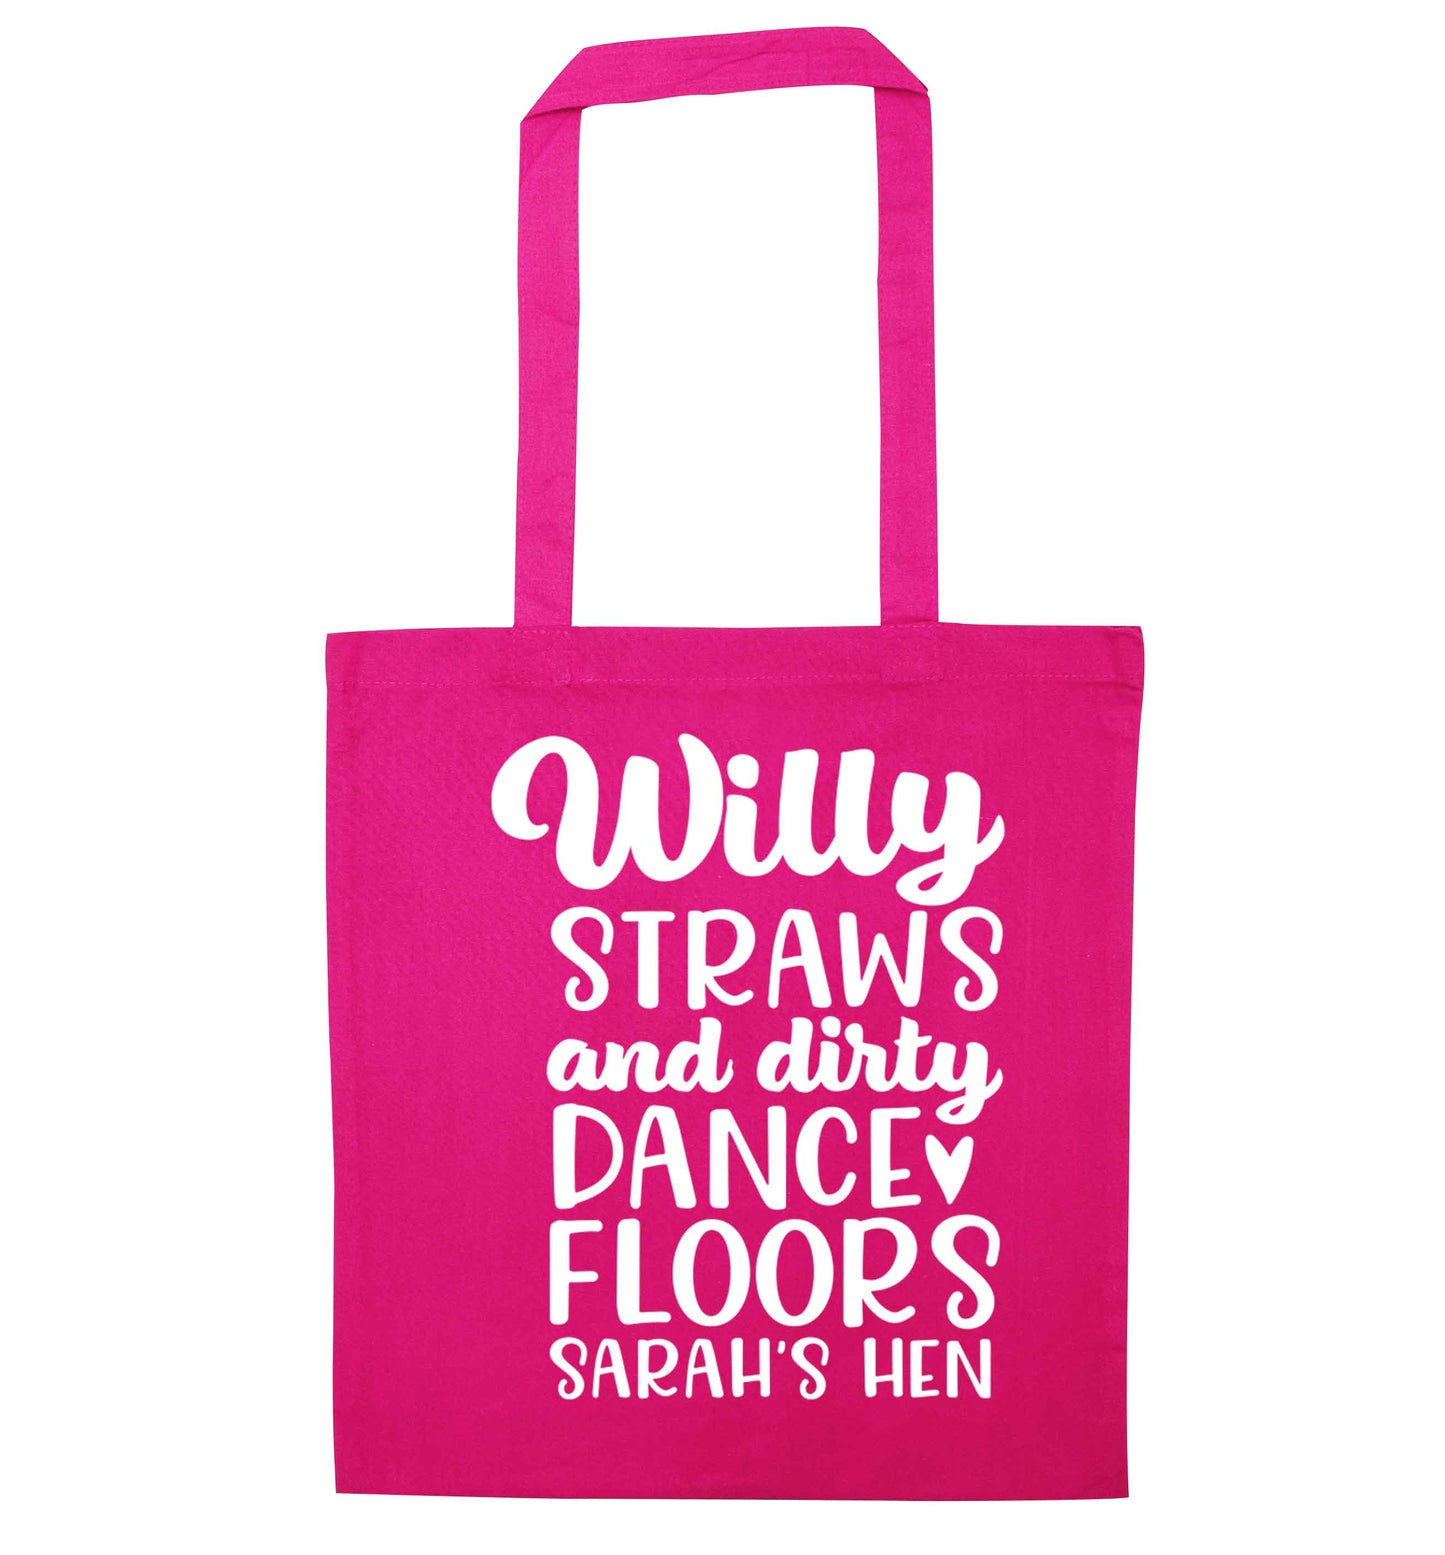 Willy straws and dirty dance floors pink tote bag